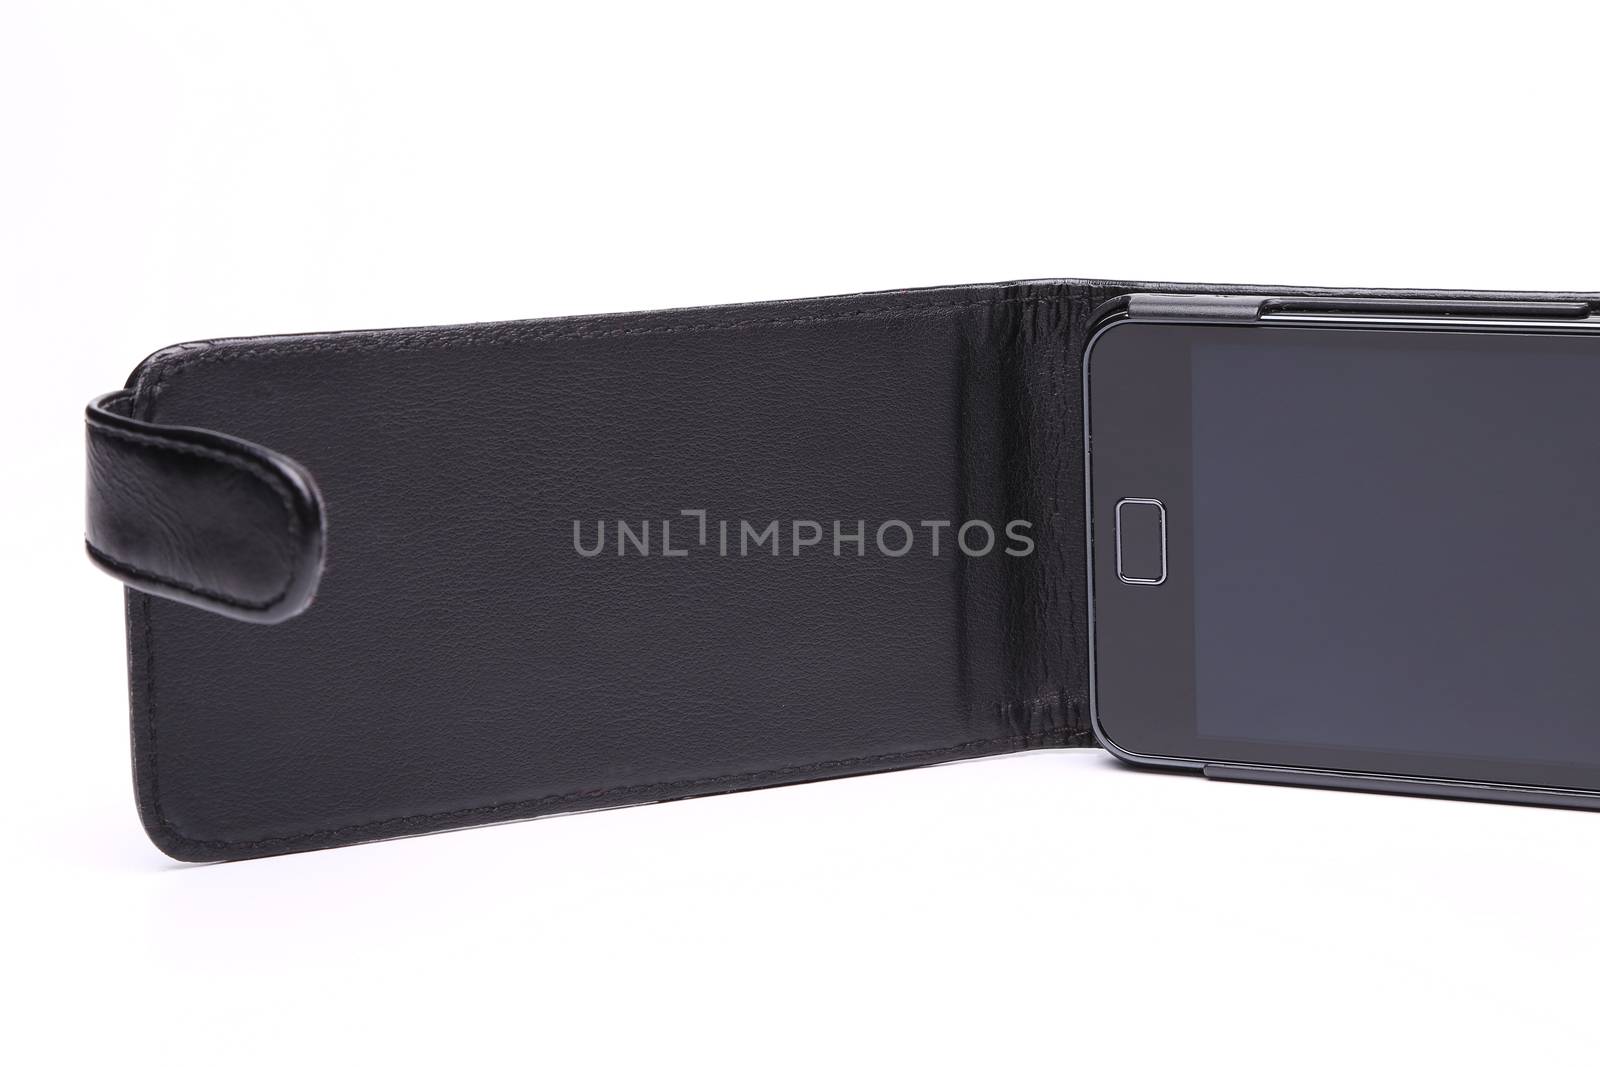 Mobile phone in its case over white background